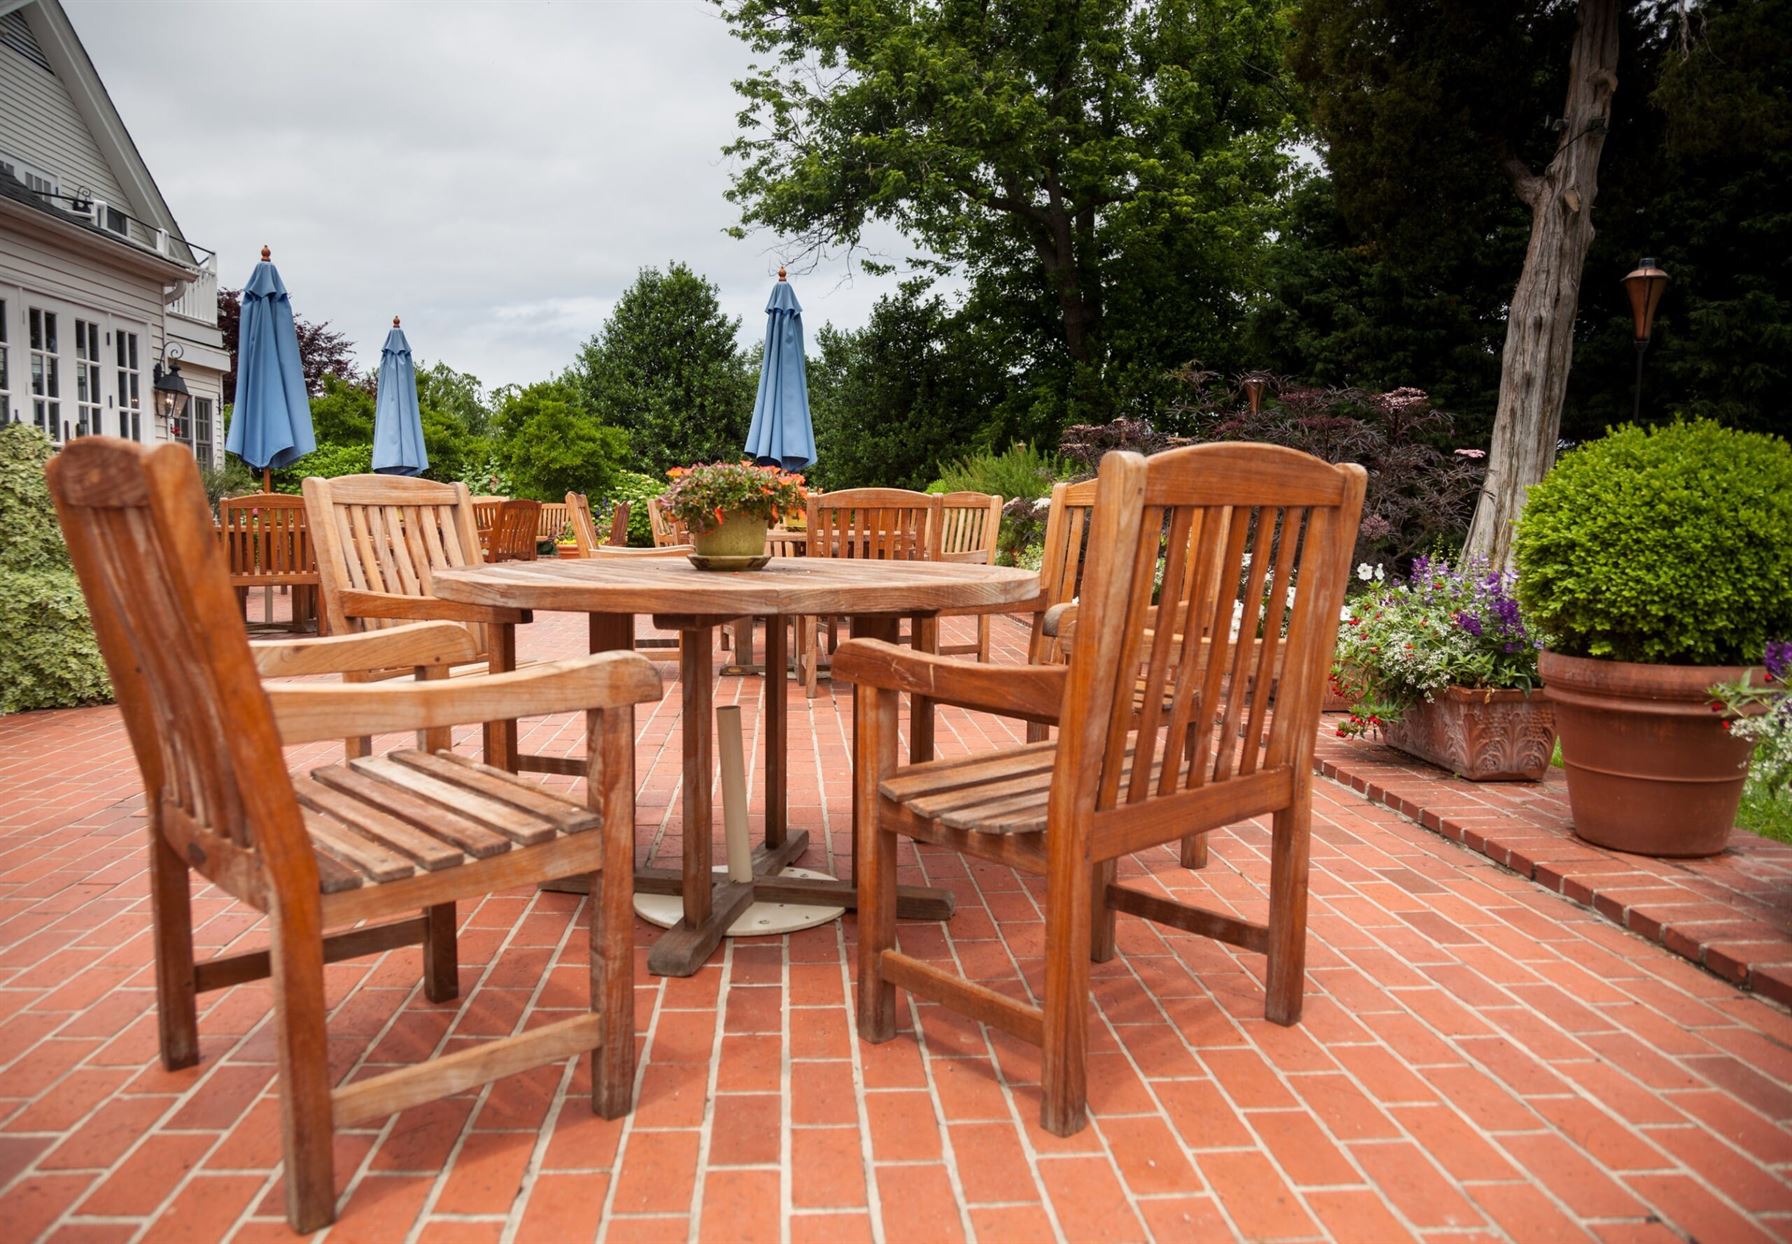 How to Care for Teak Outdoor Furniture?